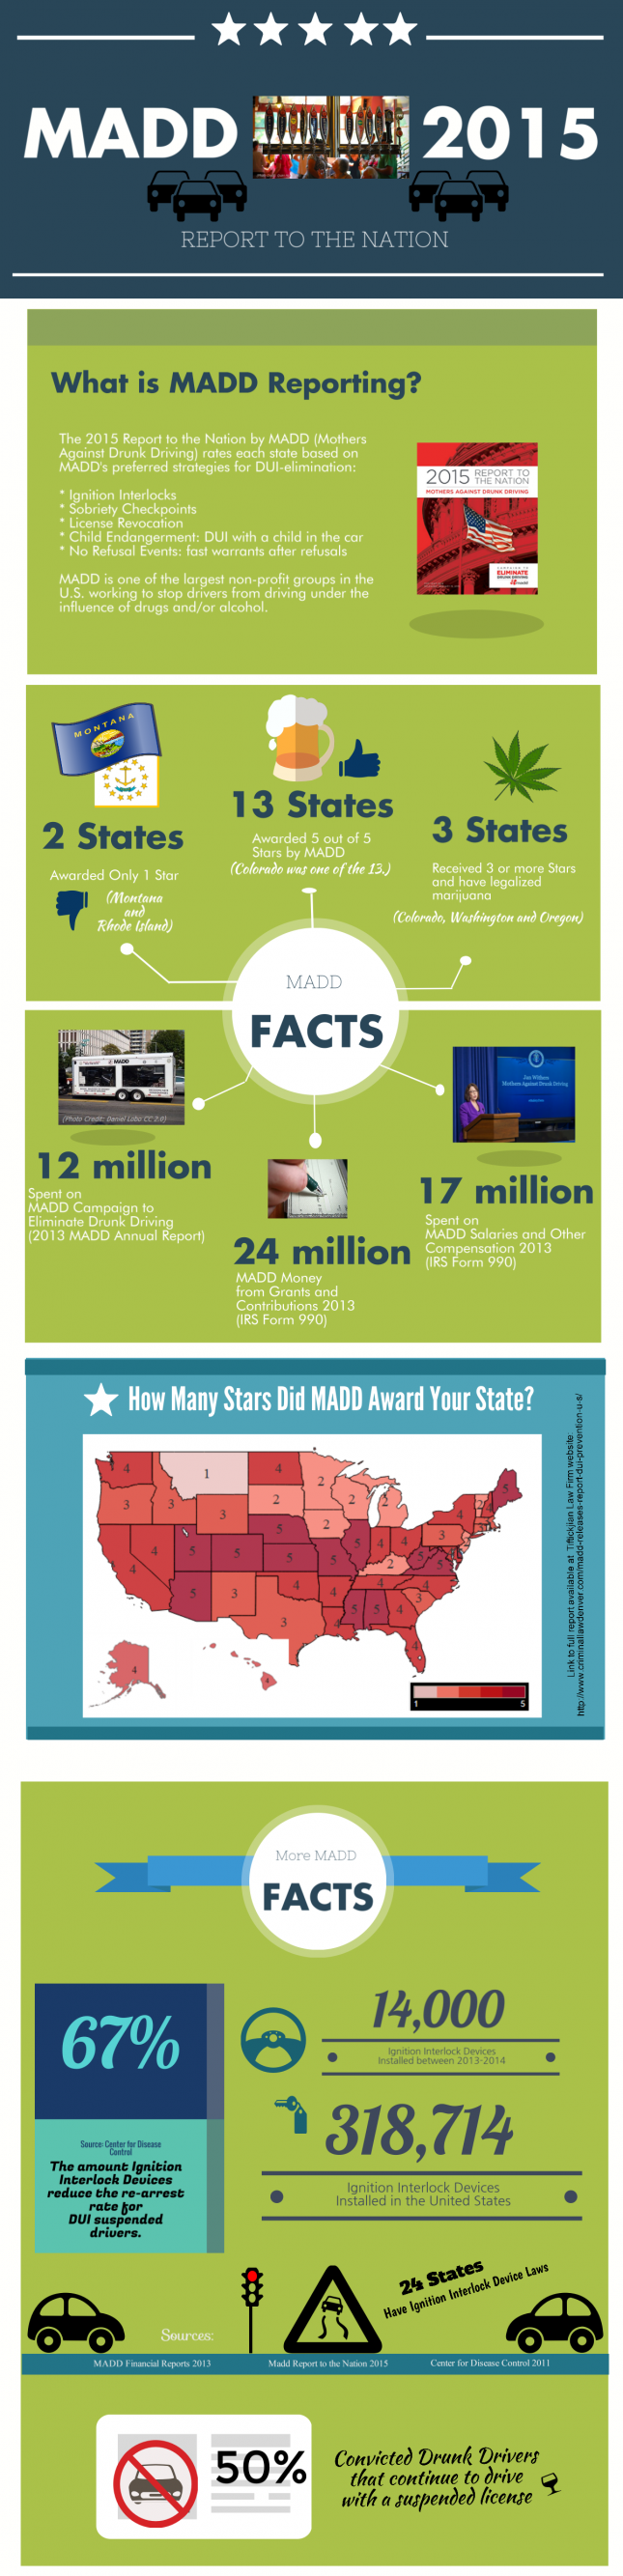 MADD Infographic Report to the Nation